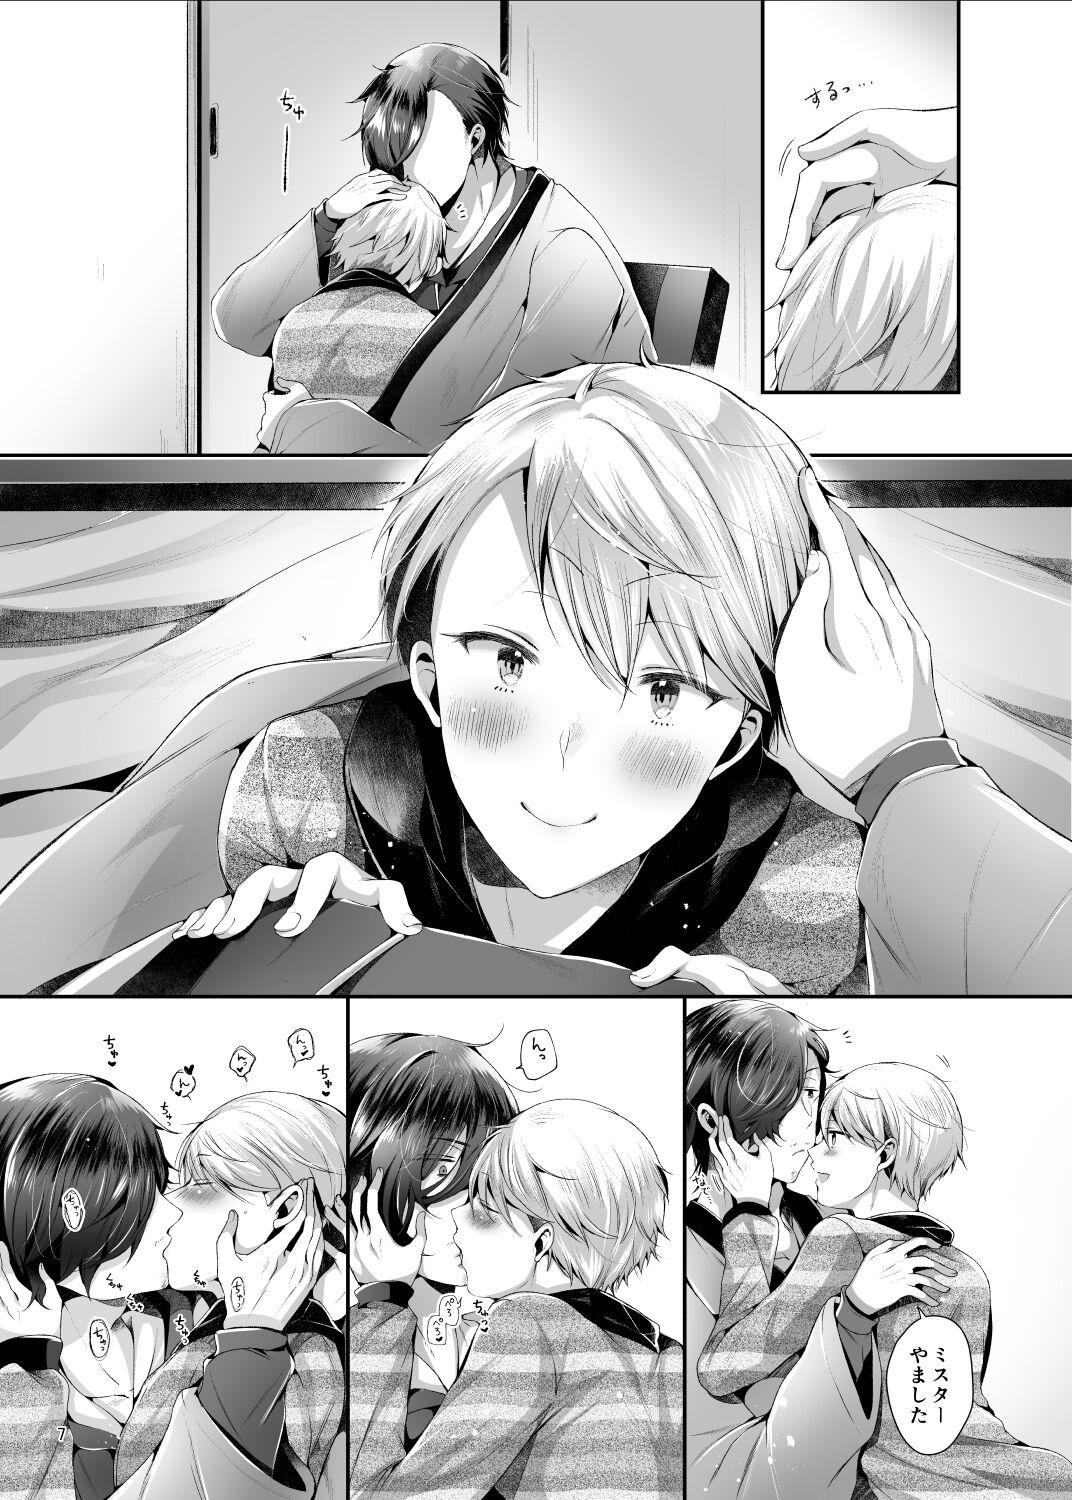 Peituda Relax at home - The idolmaster sidem Fuck Me Hard - Page 8